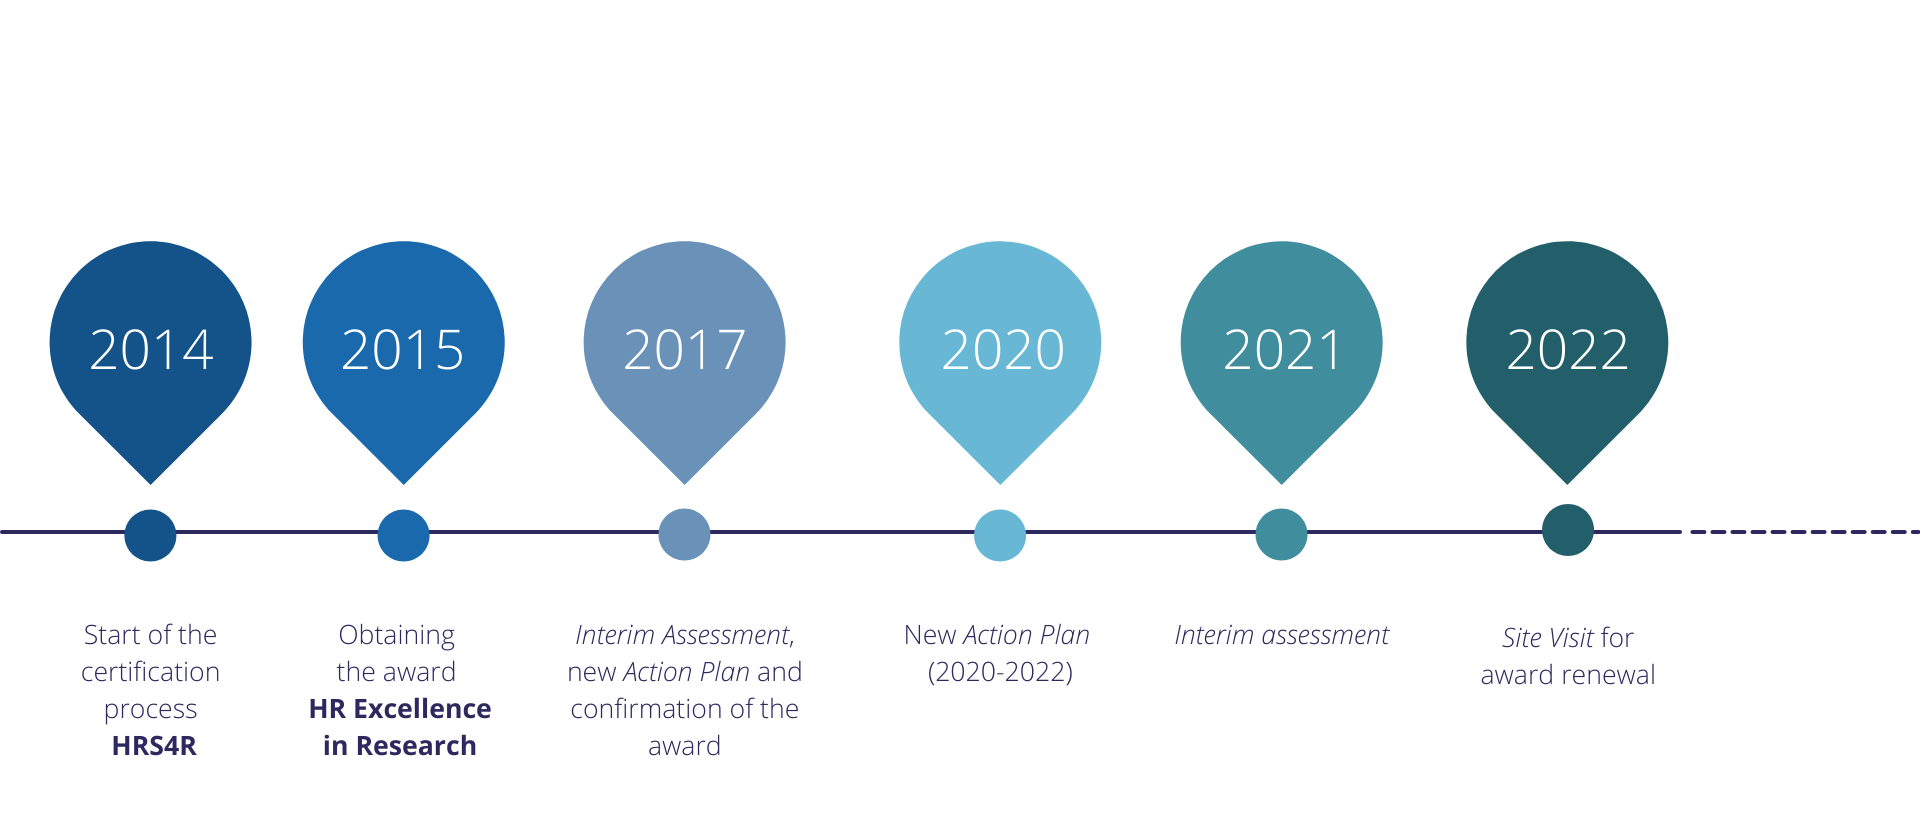 2014 Start of the certification process - 2015 Obtaining the award HR Excellence in Research - 2017 Interim Assessment, new Action Plan and confirmation of the award - 2020 New Action Plan (2020-2022) - 2021 Interim Assessment - 2022 Site Visit for award renewal